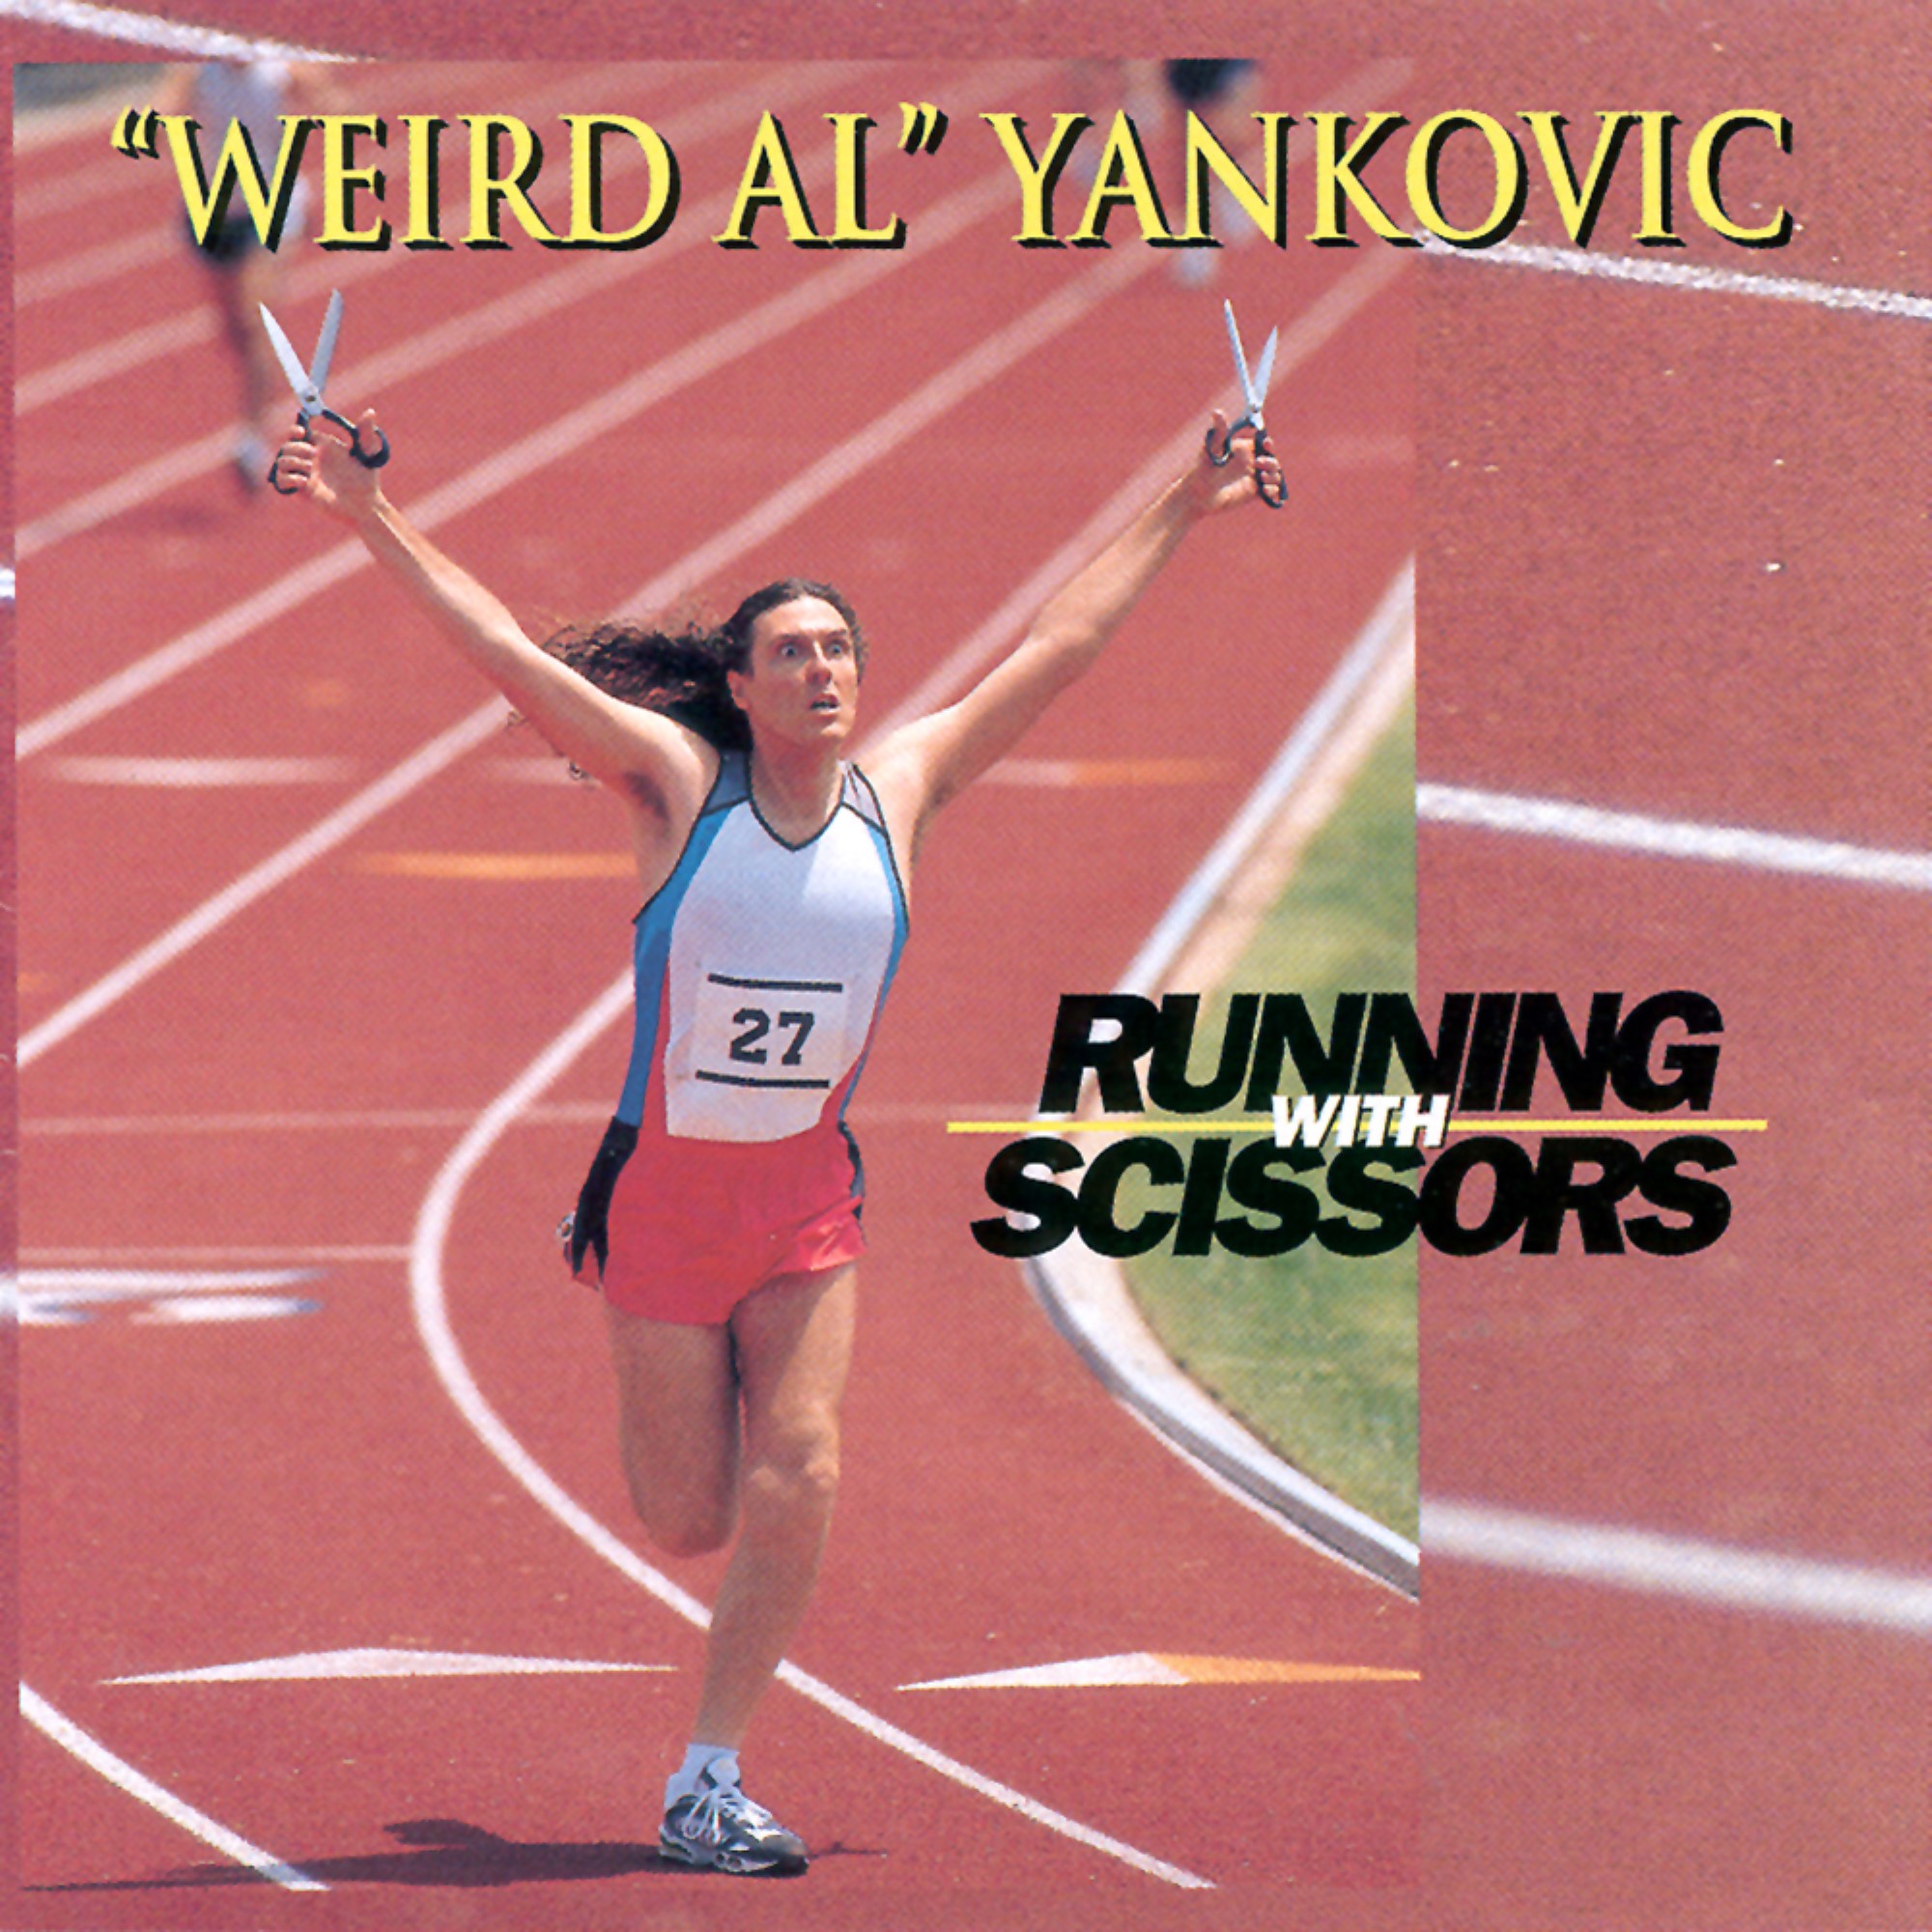 Cover of Running with Scissors by Weird Al Yankovic